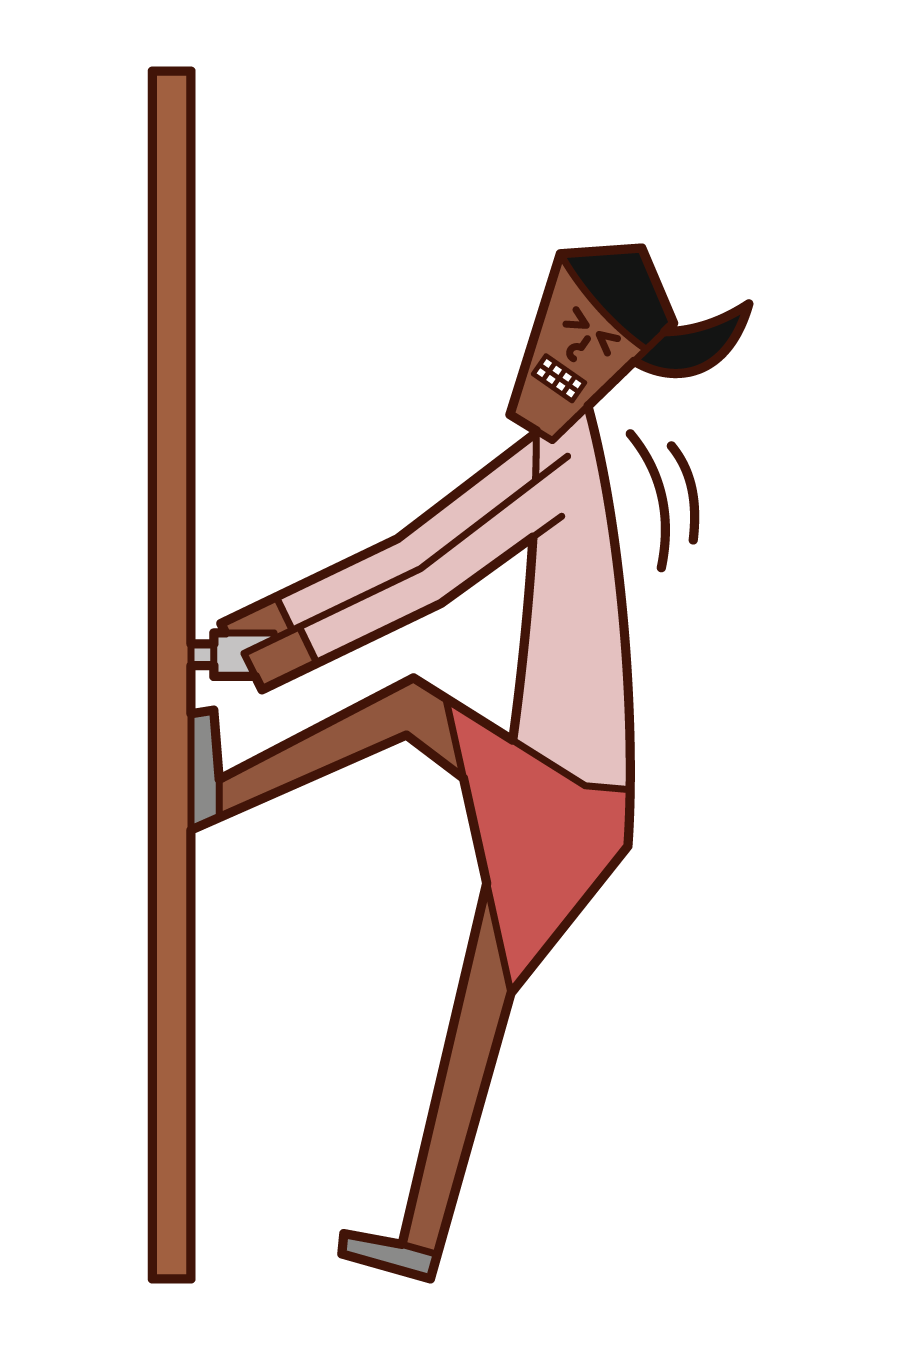 Illustration of a woman trying to open a door that doesn't open